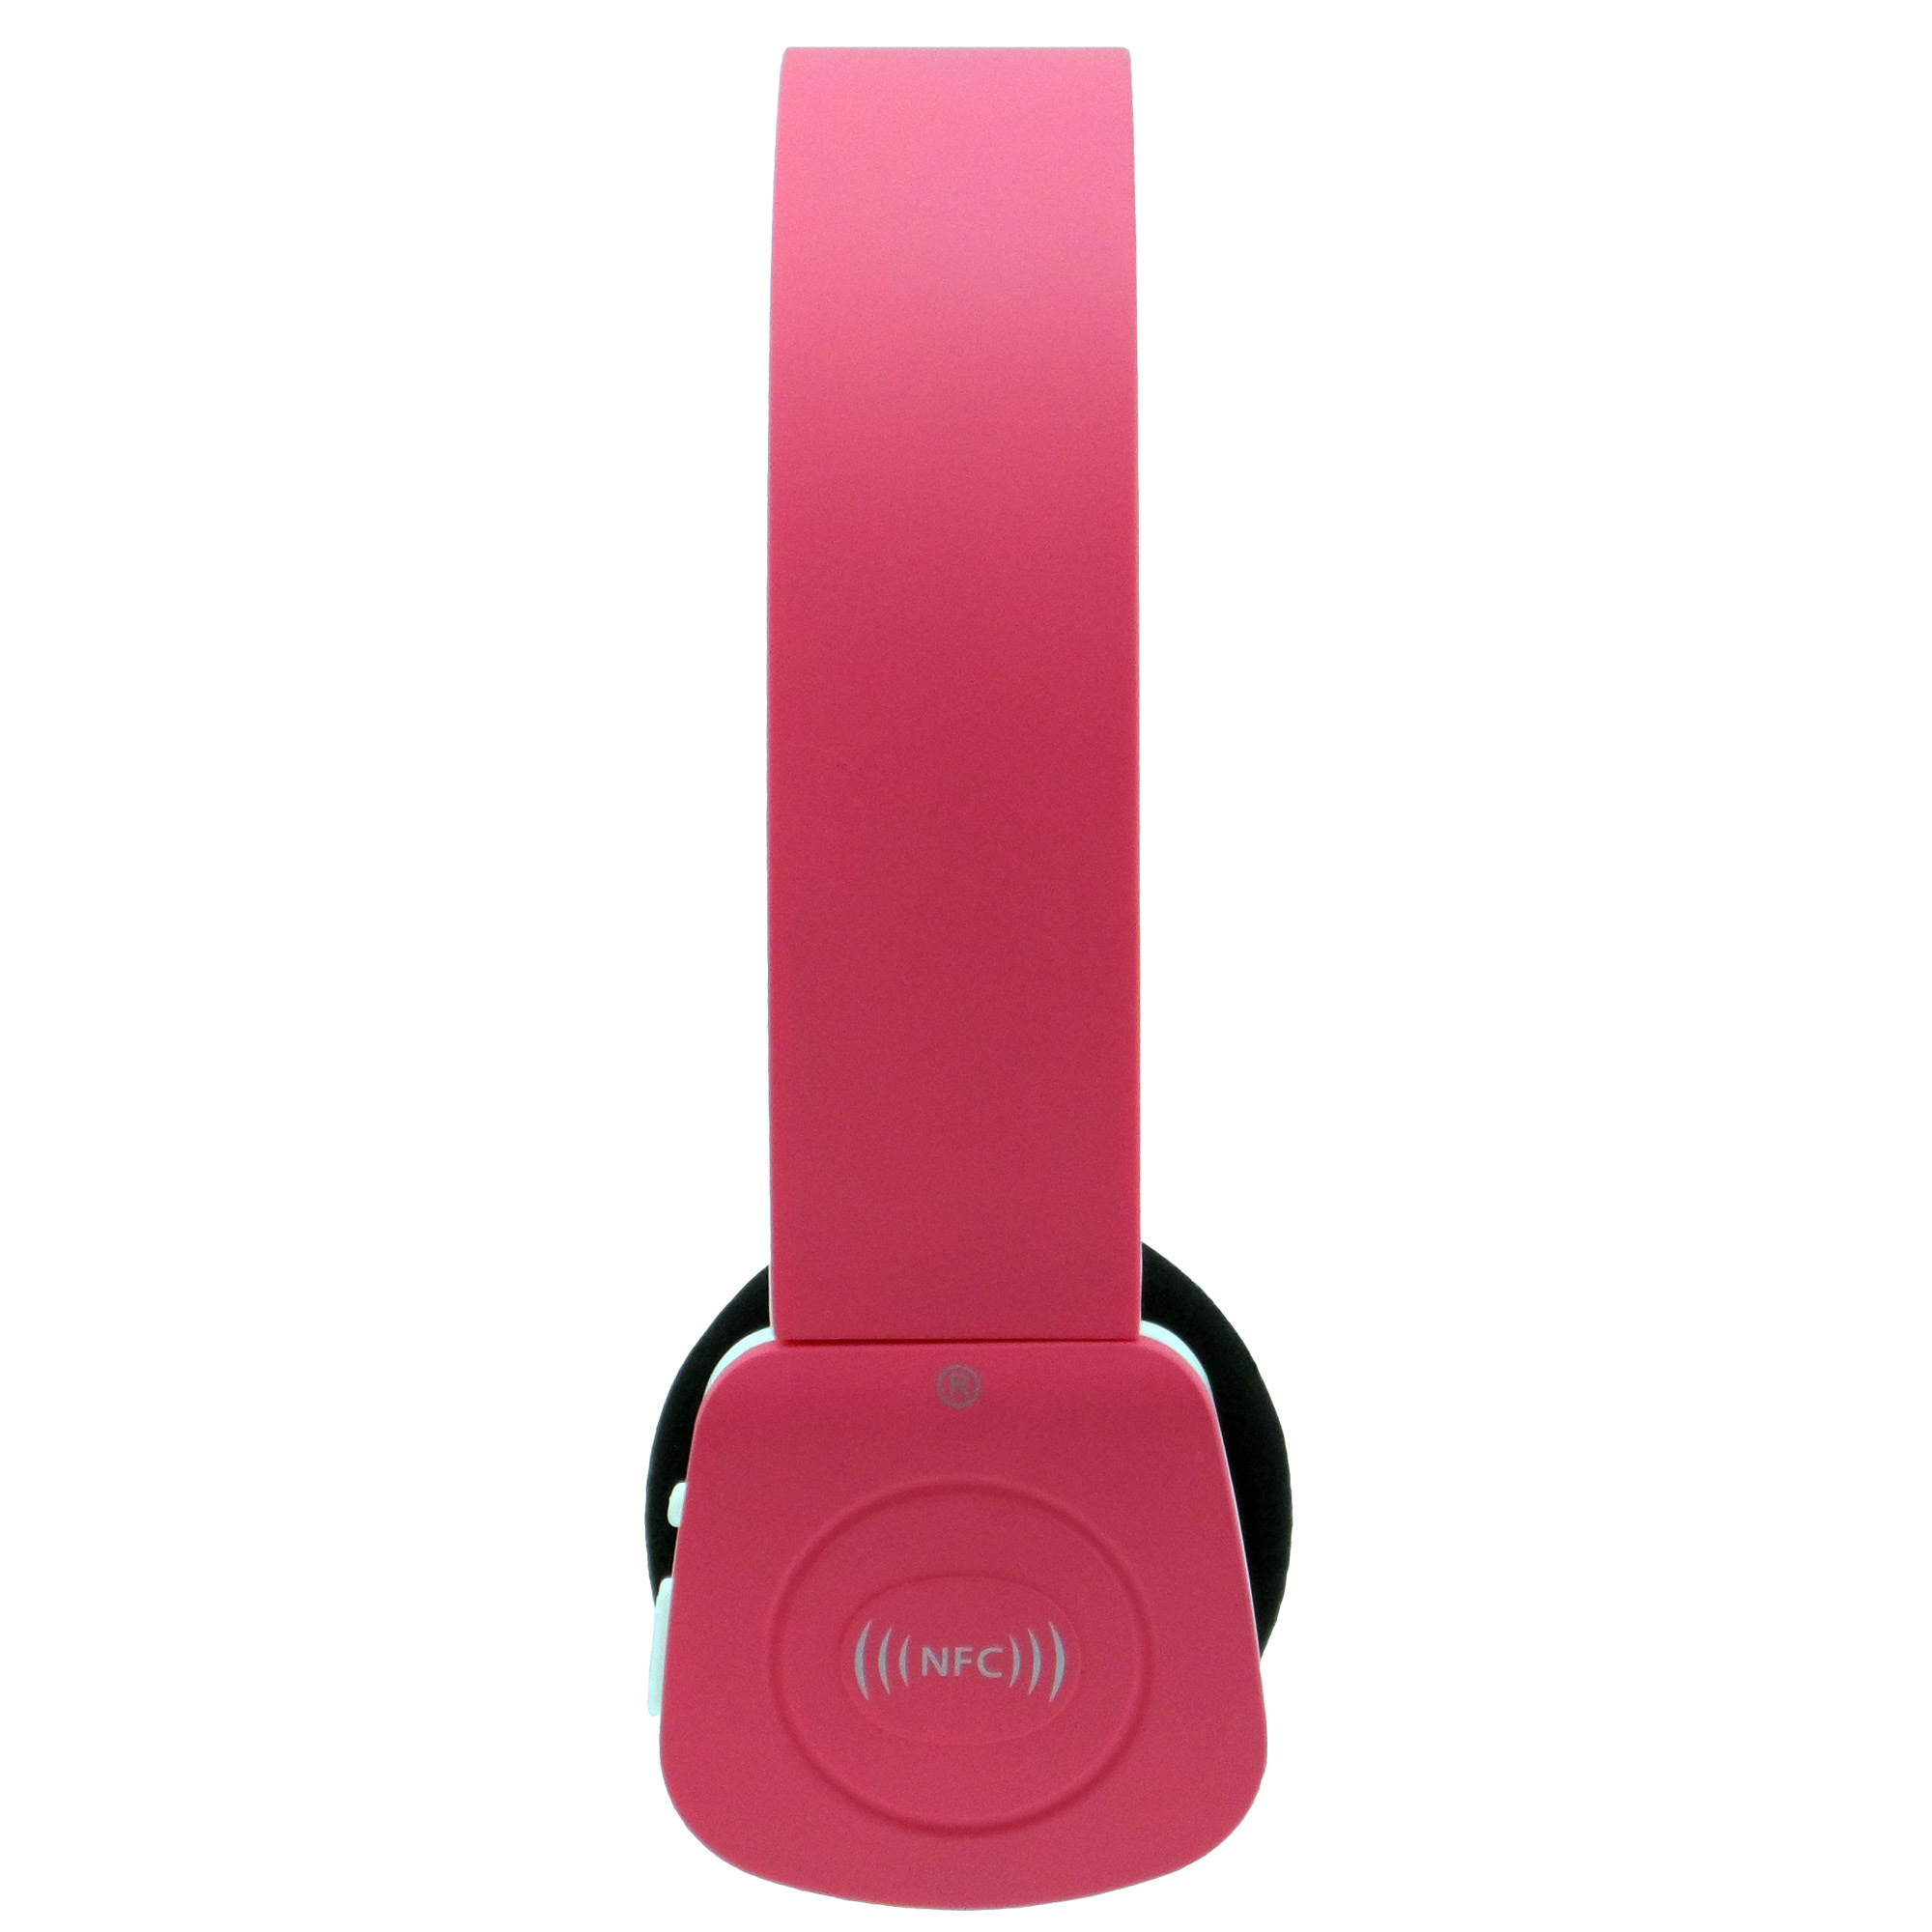 Good Headset with Bluetooth and Nfc Function (BK207)